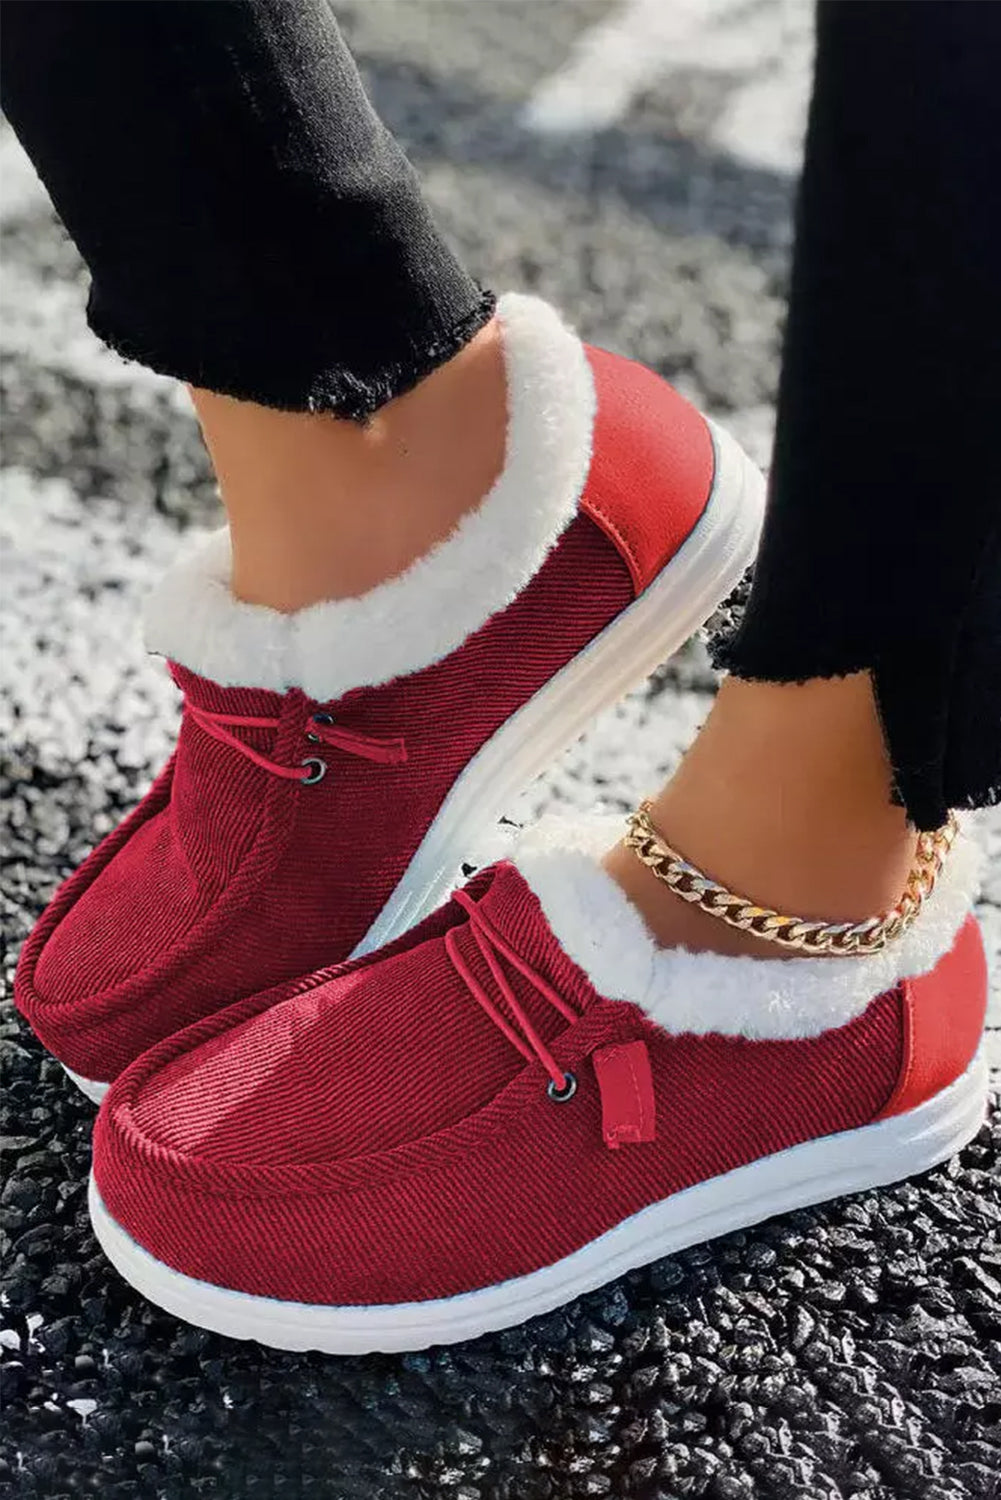 Fiery Red Lace Up Corduroy Fur Lined Slips On Shoes